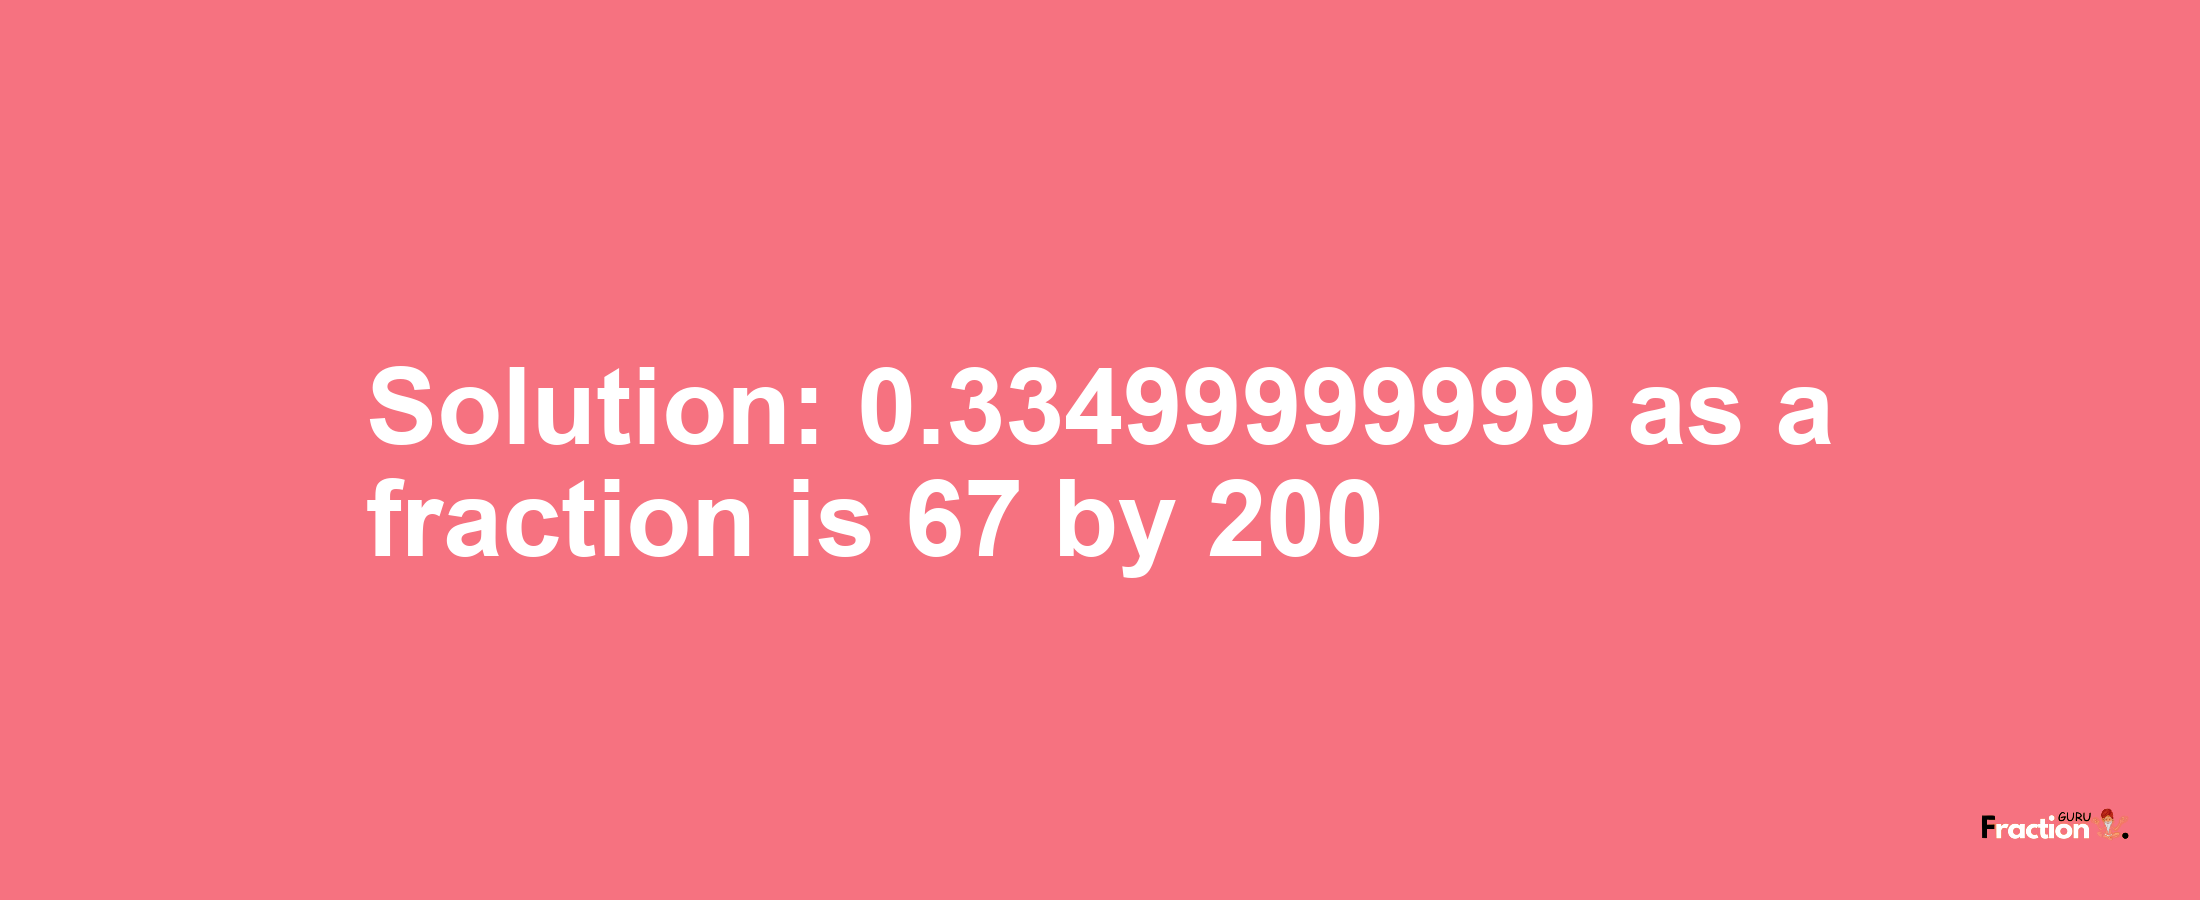 Solution:0.33499999999 as a fraction is 67/200